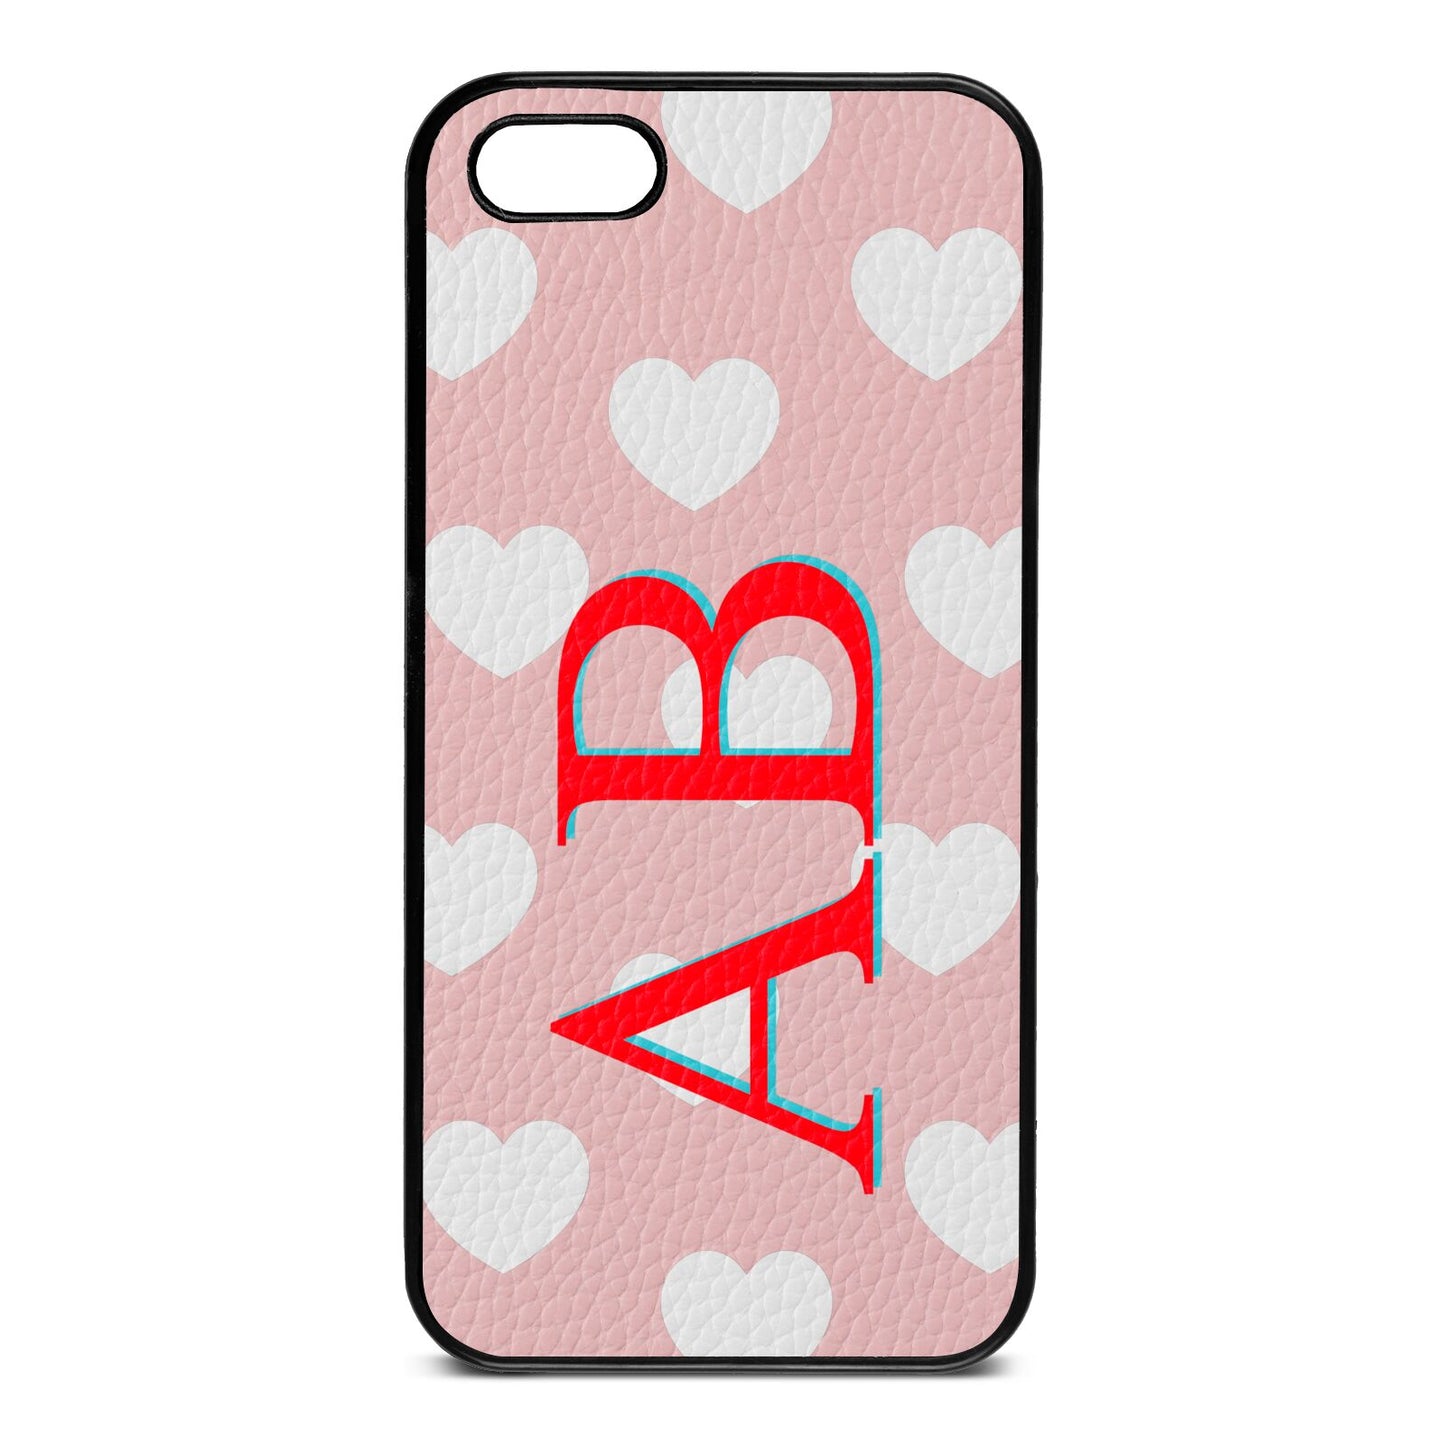 Heart Print Initials Pink Pebble Leather iPhone 5 Case